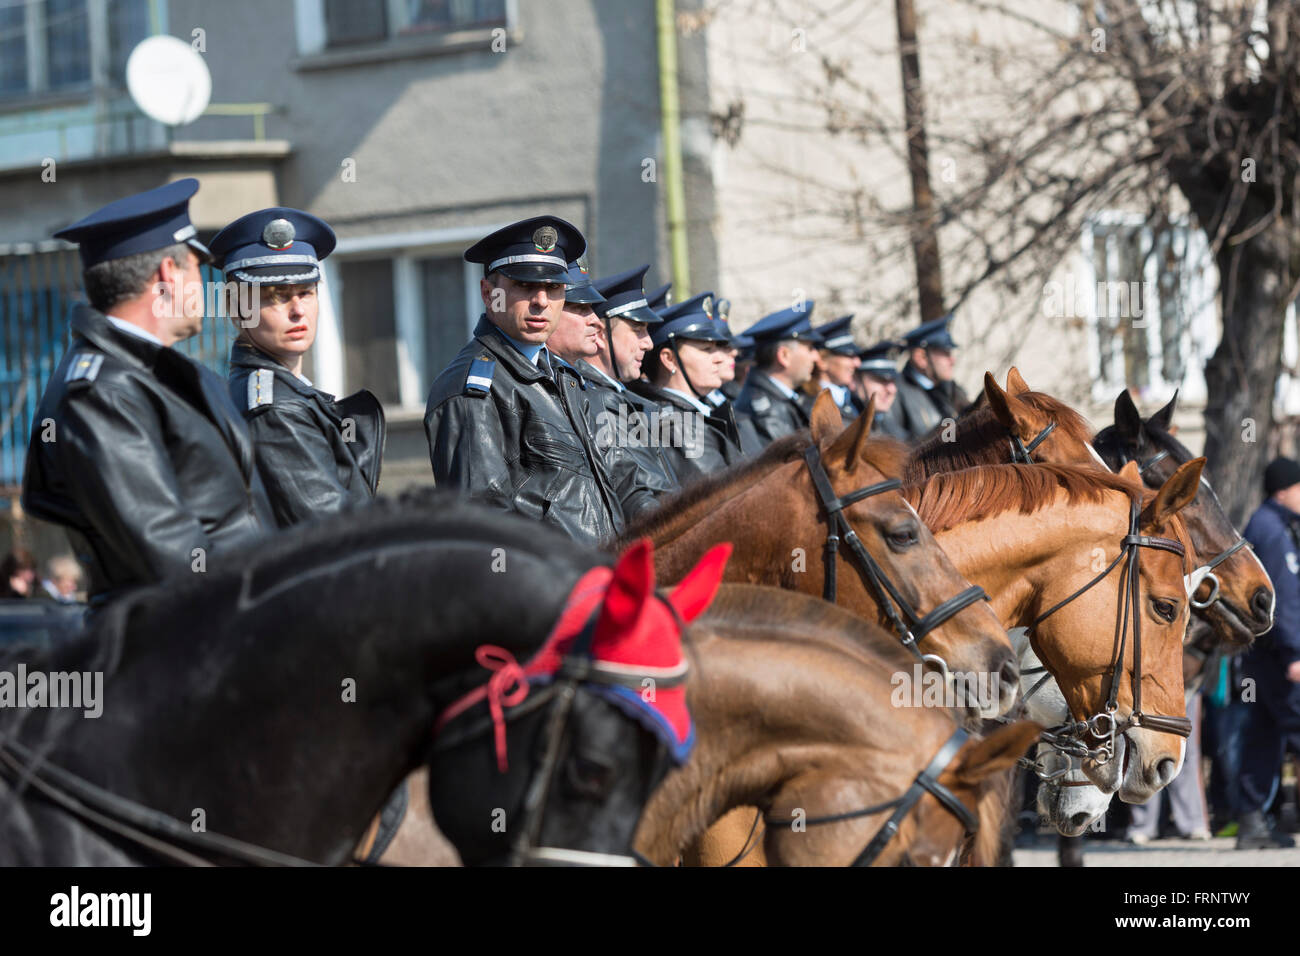 Sofia, Bulgaria - March 19, 2016: Policemen and policewomen from Horse police unit are participating in a parade at Saint Theodo Stock Photo